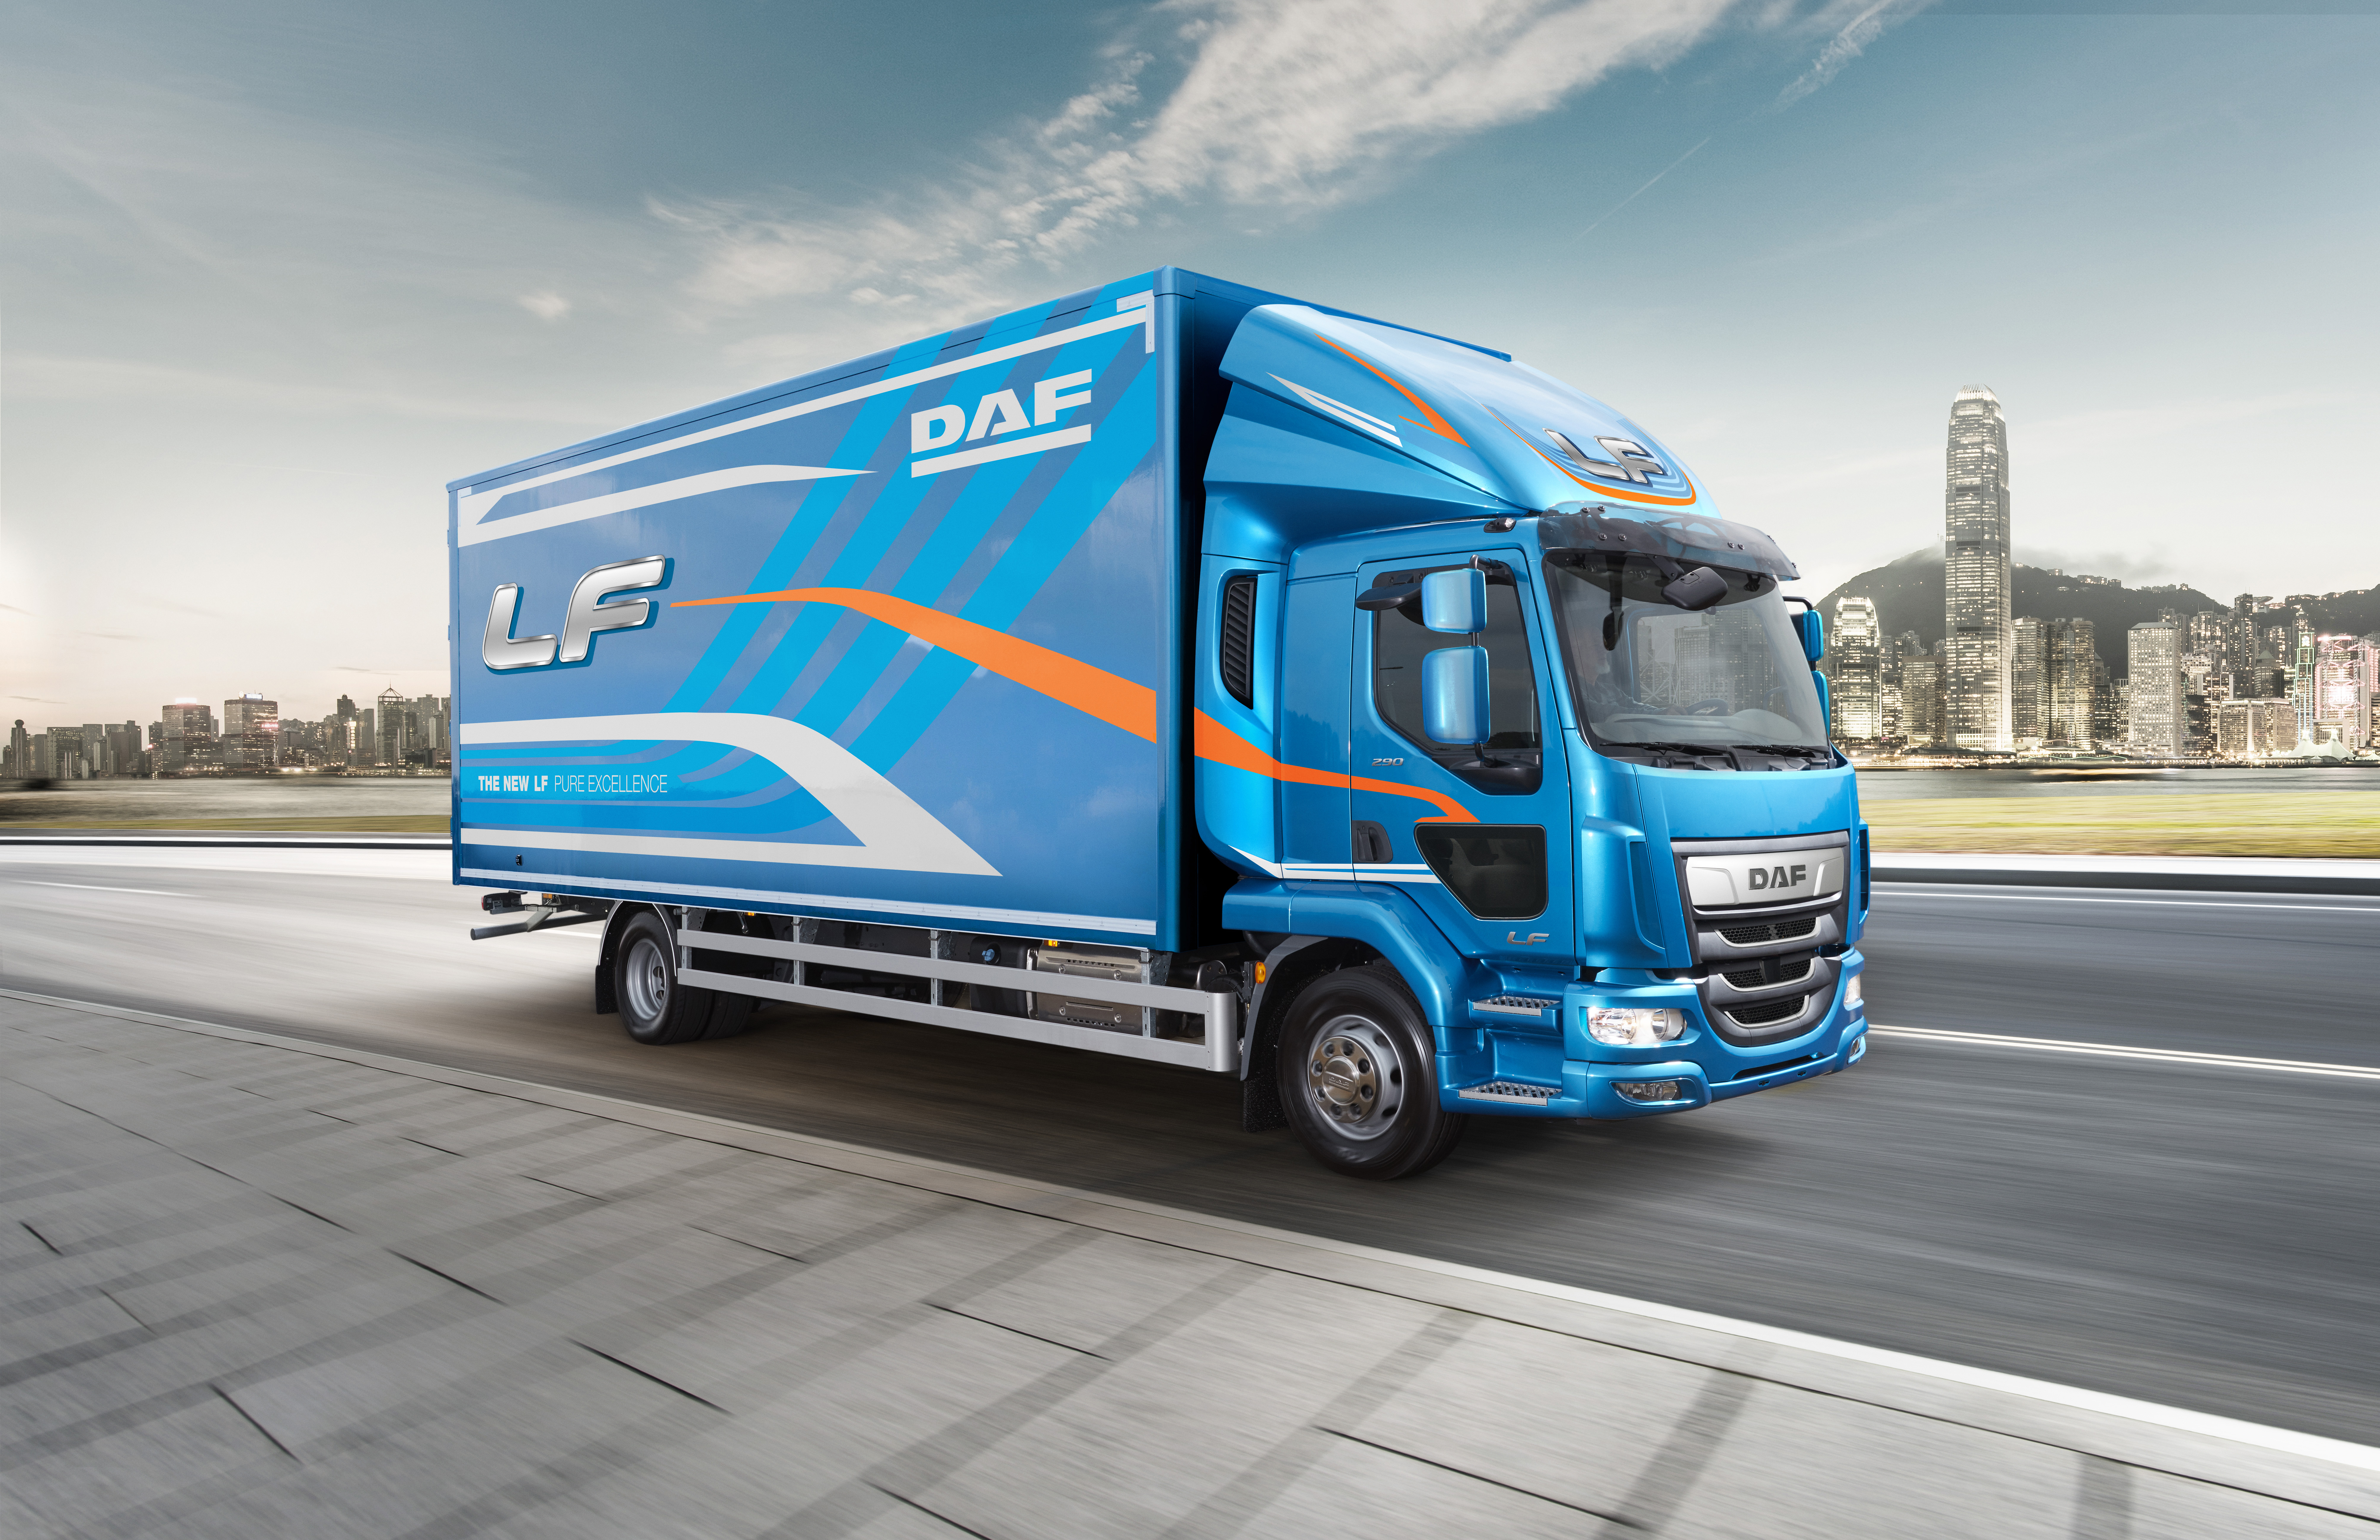 DAF LF Fleet Truck of the Year 2019 in the UK